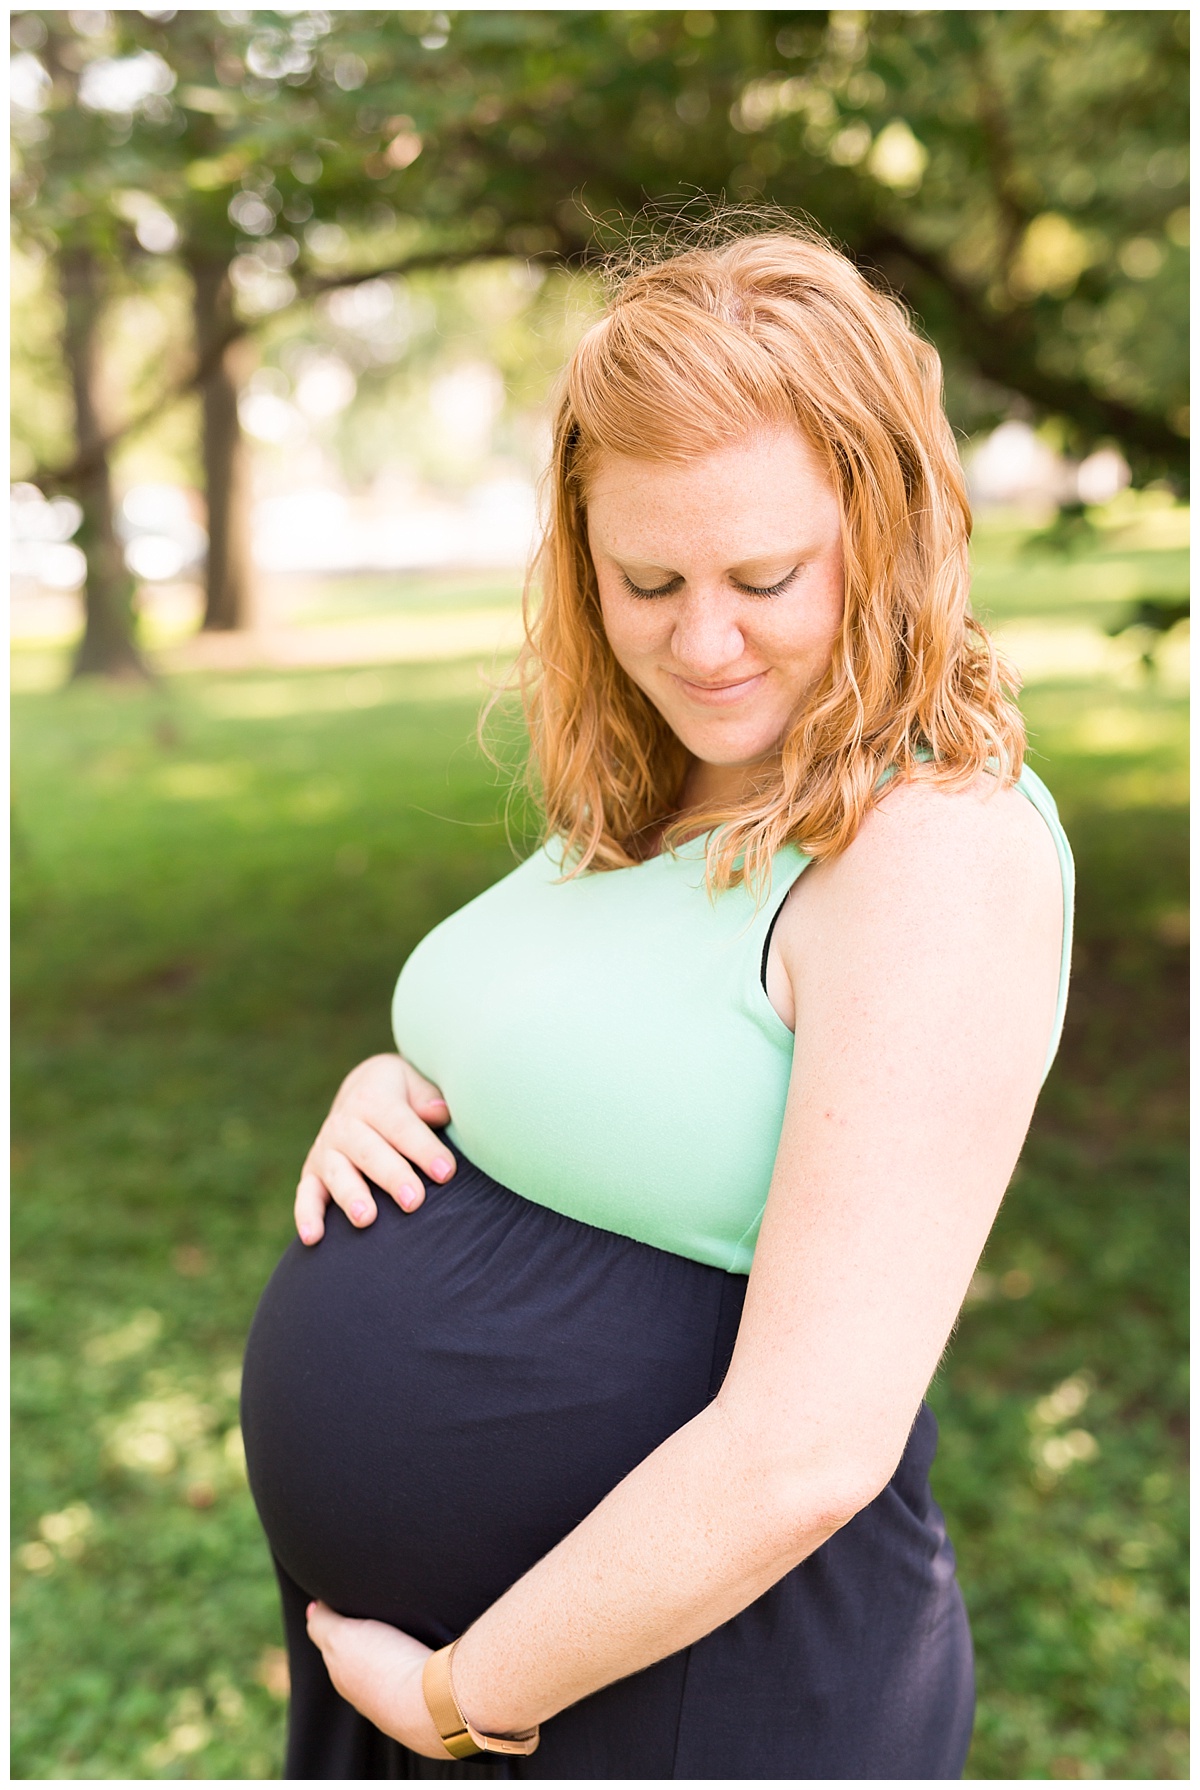 a precious one on the way | st louis maternity photographer - Kelsi ...